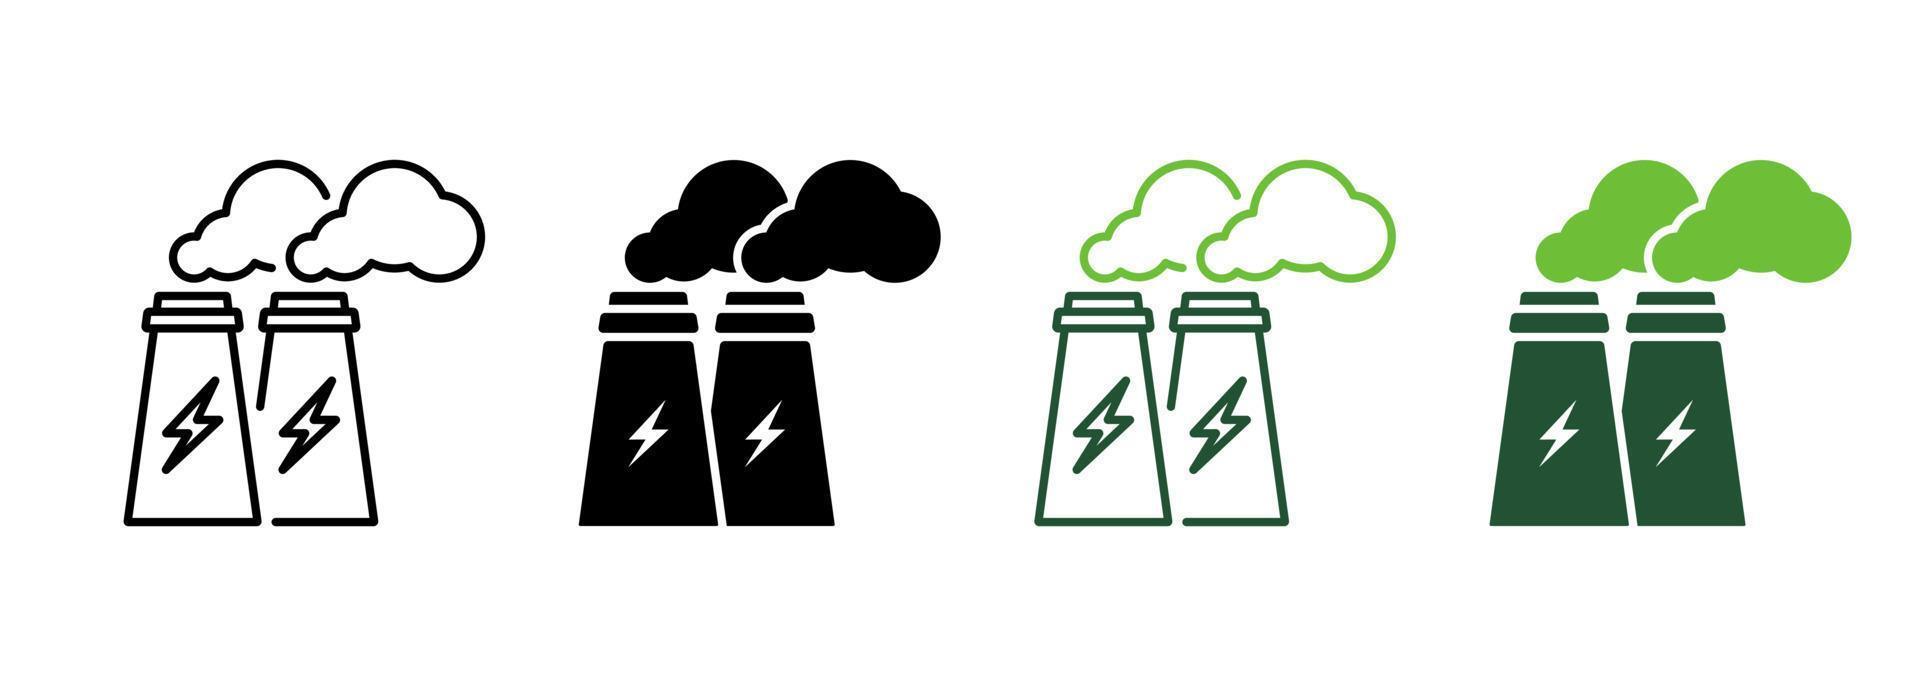 Power Station Line and Silhouette Icon Color Set. Electricity Energy Pictogram. Factory Industry Building with Smoke Symbol Collection on White Background. Power Plant. Isolated Vector Illustration.